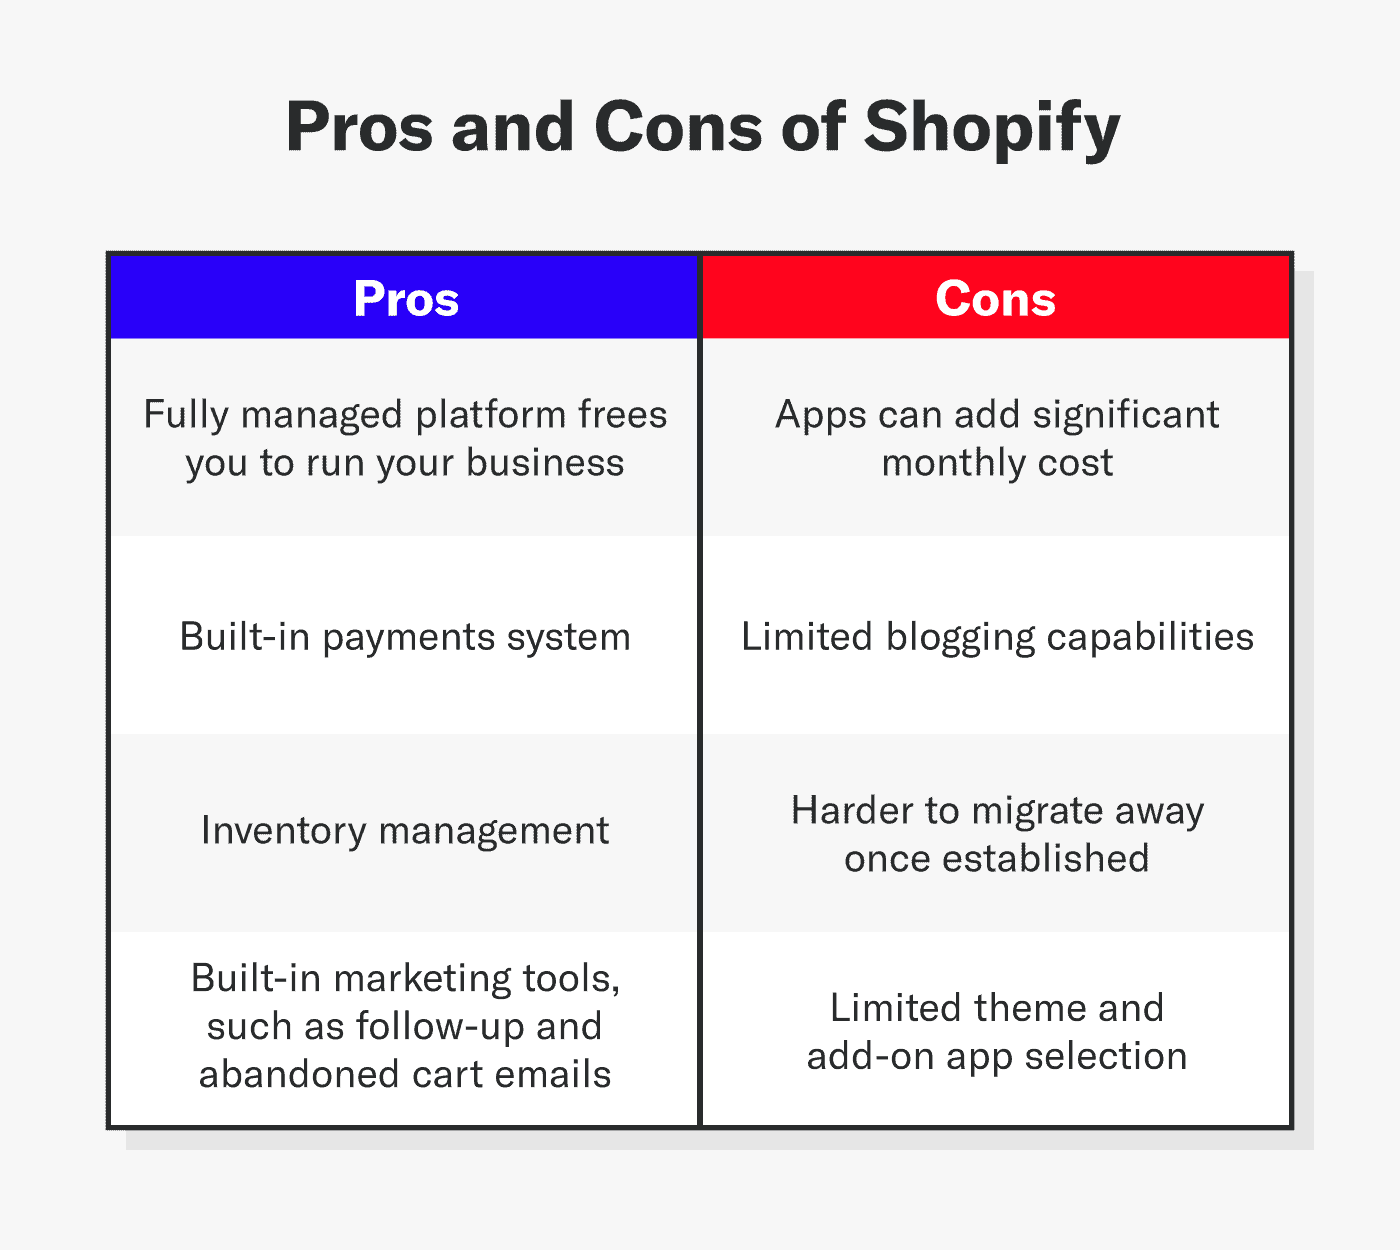 Pros and cons of Shopify